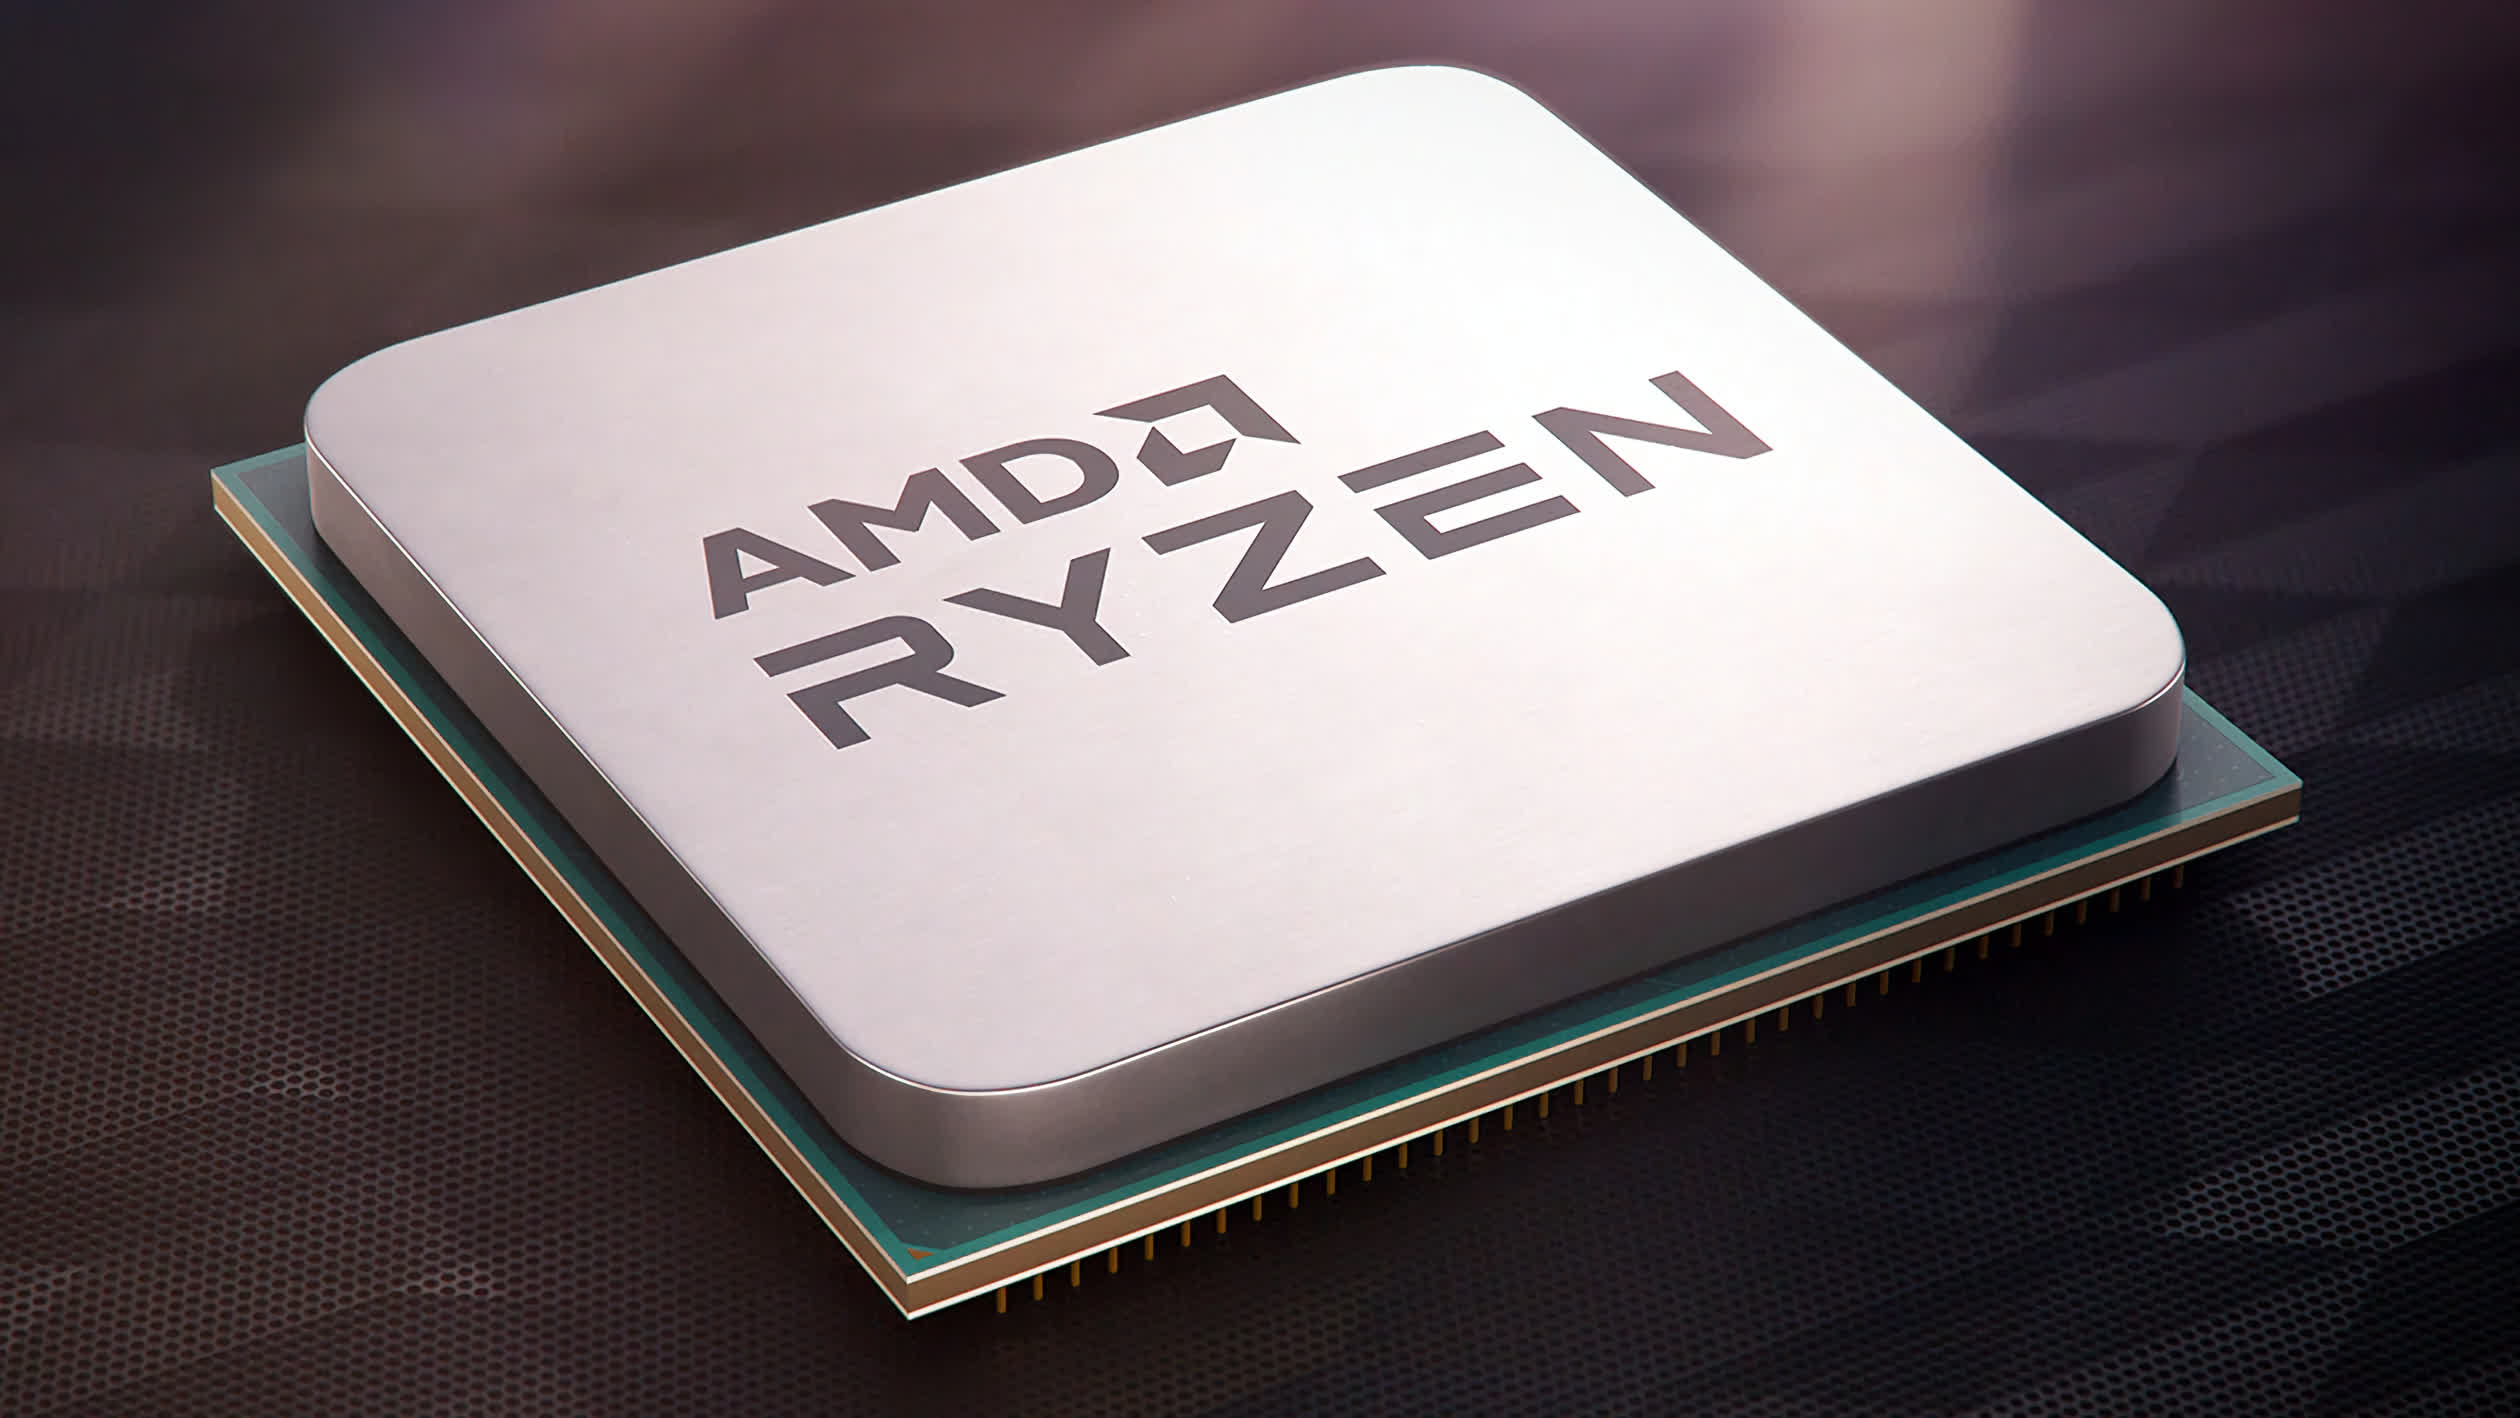 You may not be able to overclock the AMD Ryzen 7 5800X3D